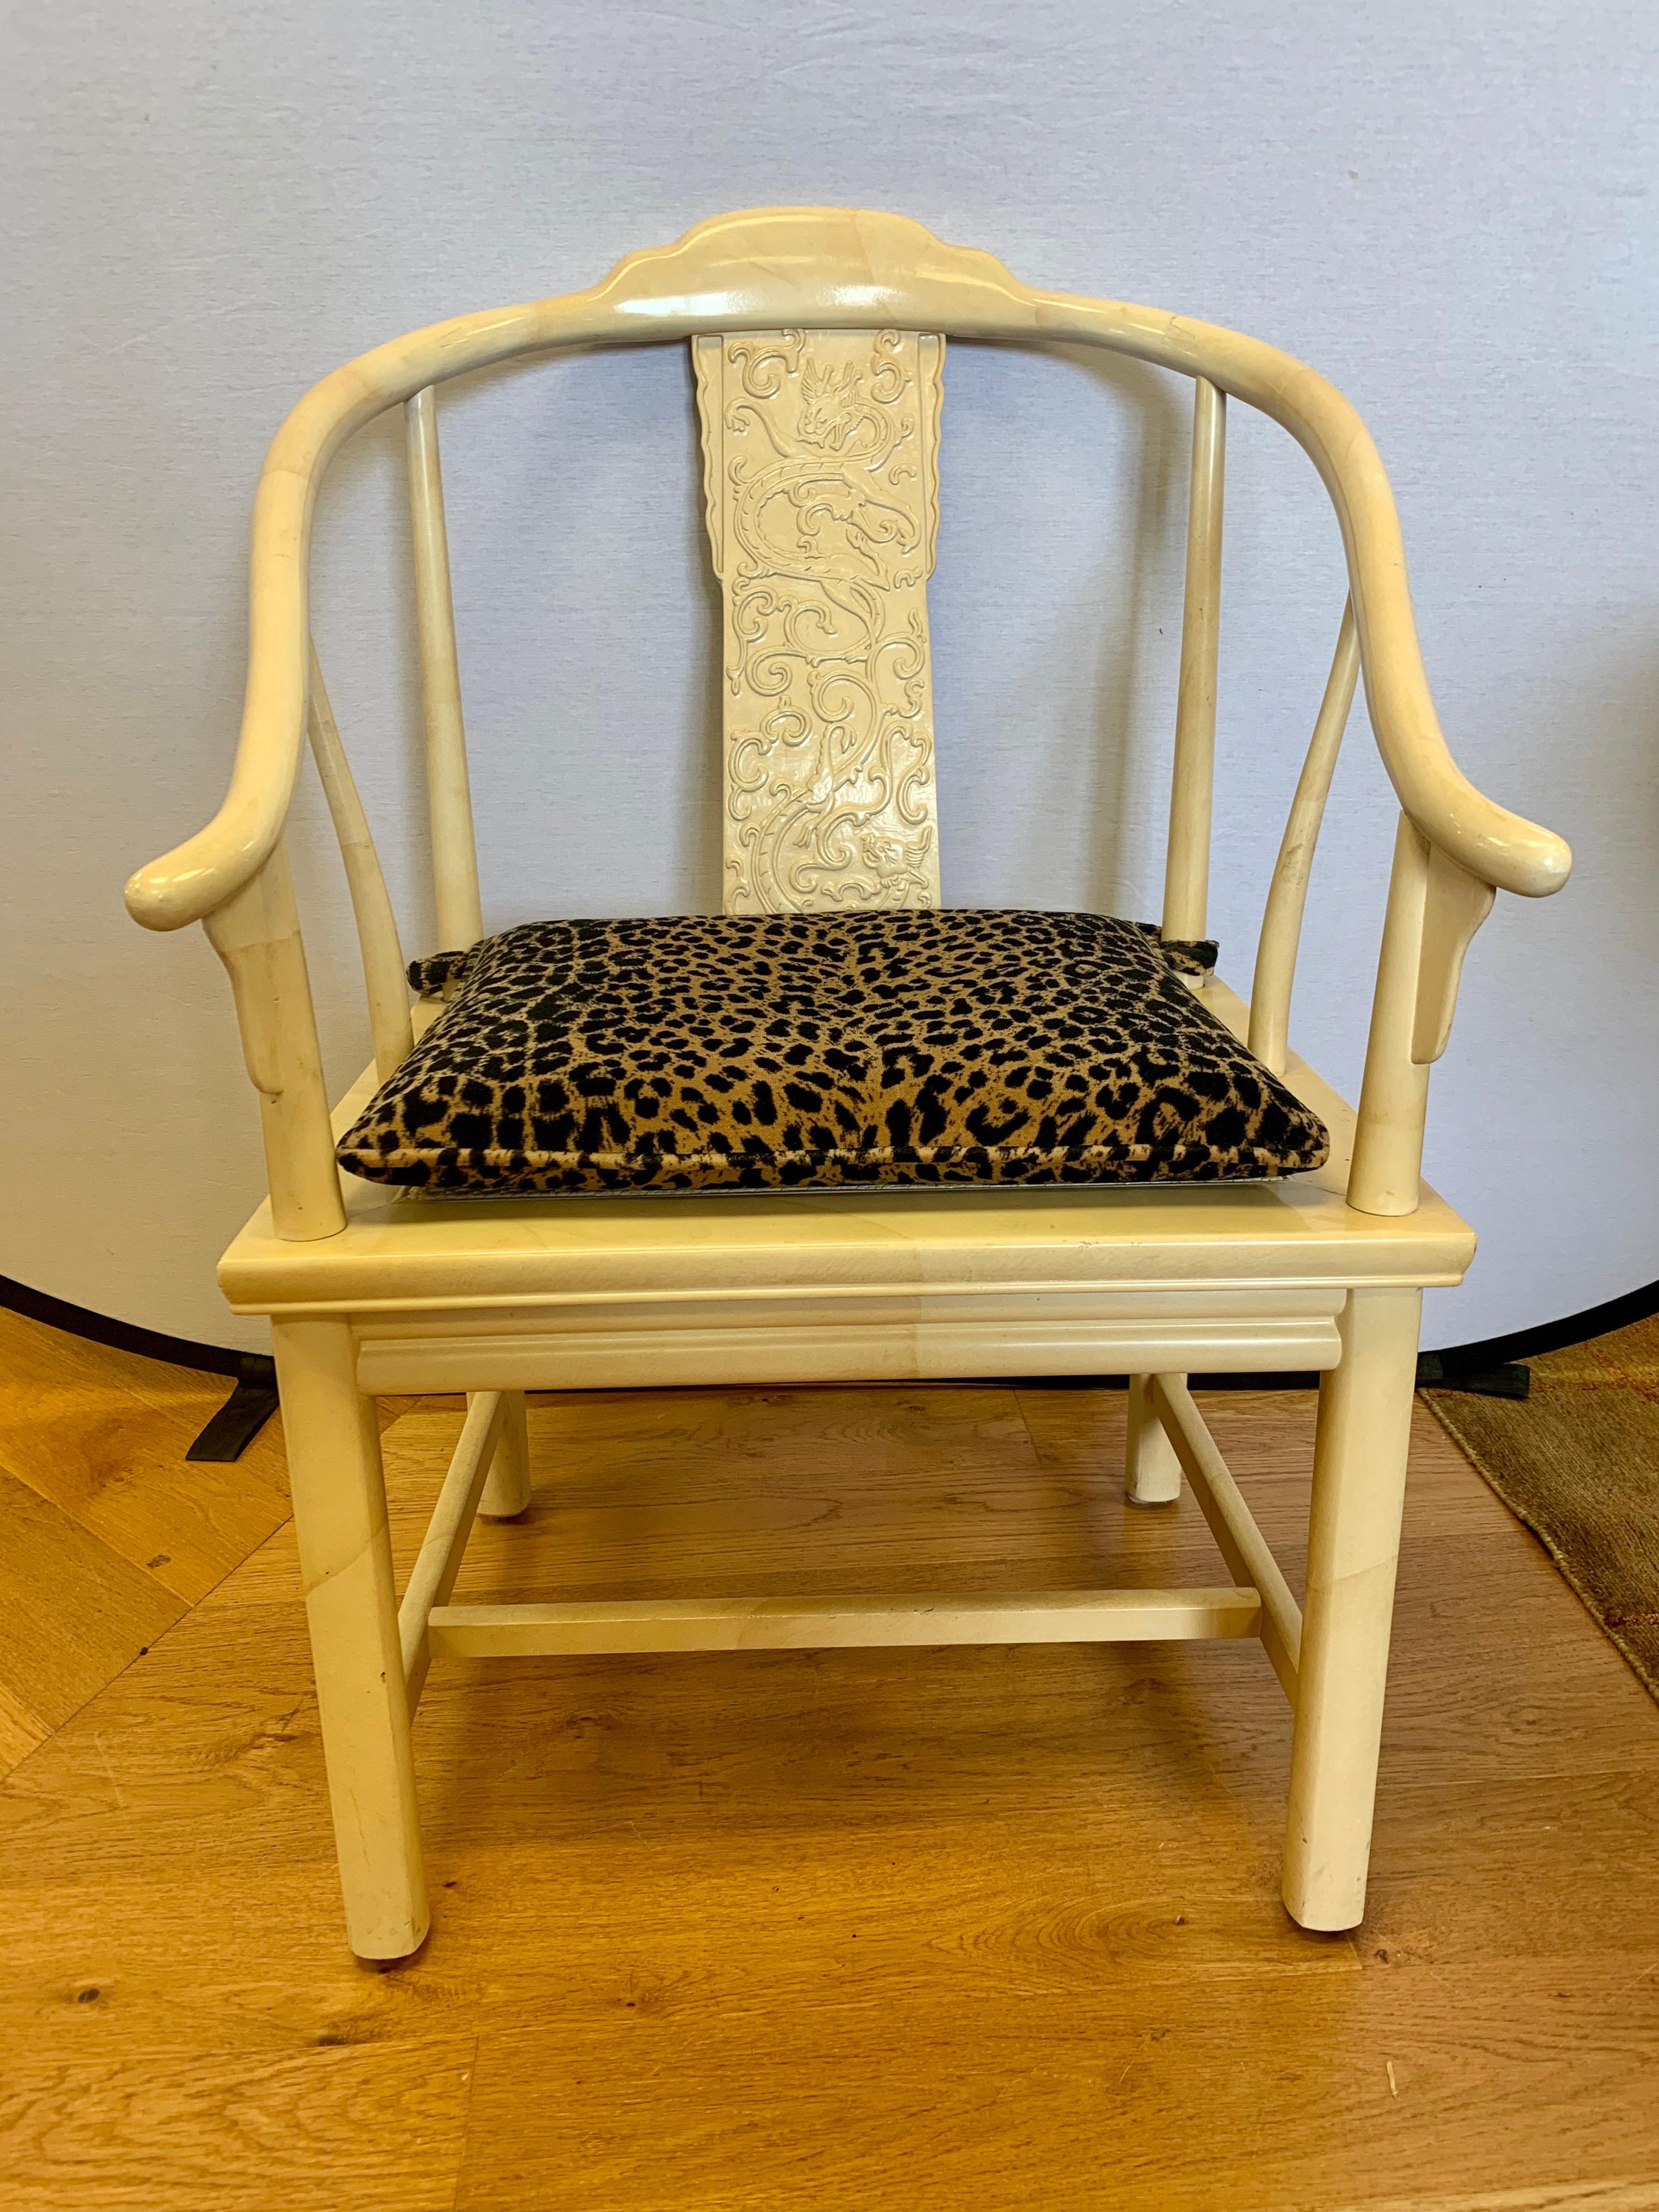 Elegant pair of James Mont style horseshoe chairs by Henredon. These feature not only gorgeous cane seats but also custom leopard set cushions. All manufacturer hallmarks are at bottom. These chairs are fully lacquered throughout in a color best